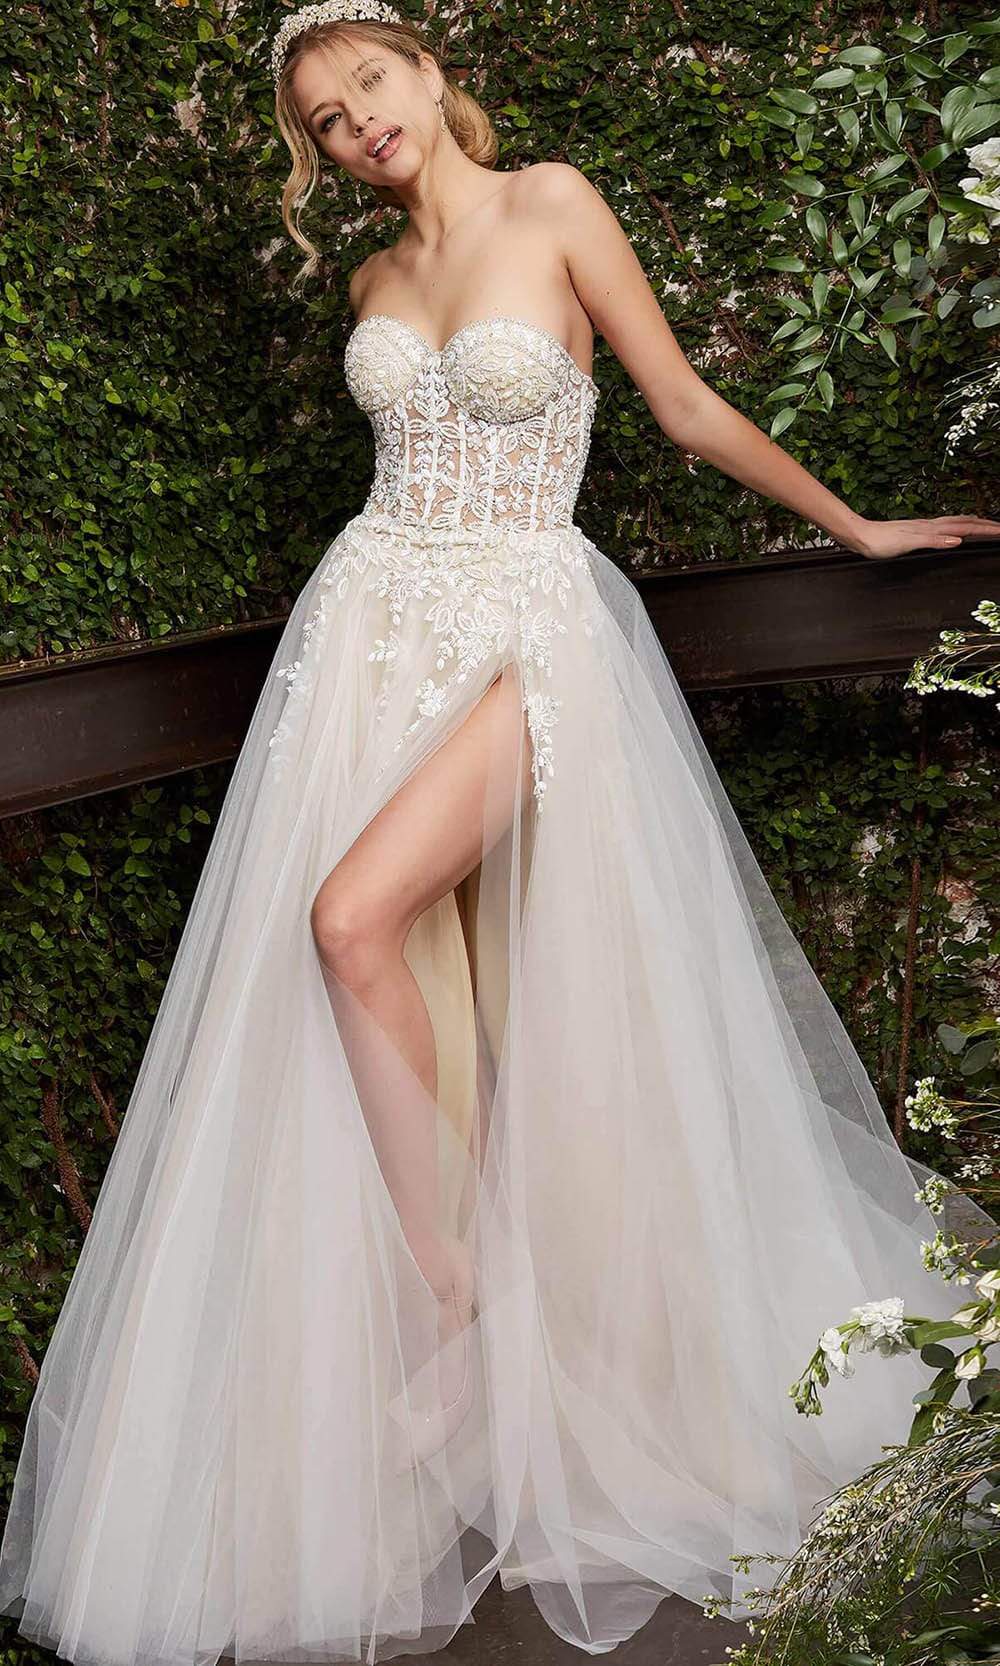 Breathable Thin Type Lace Corset Strapless Wedding Dress Corset